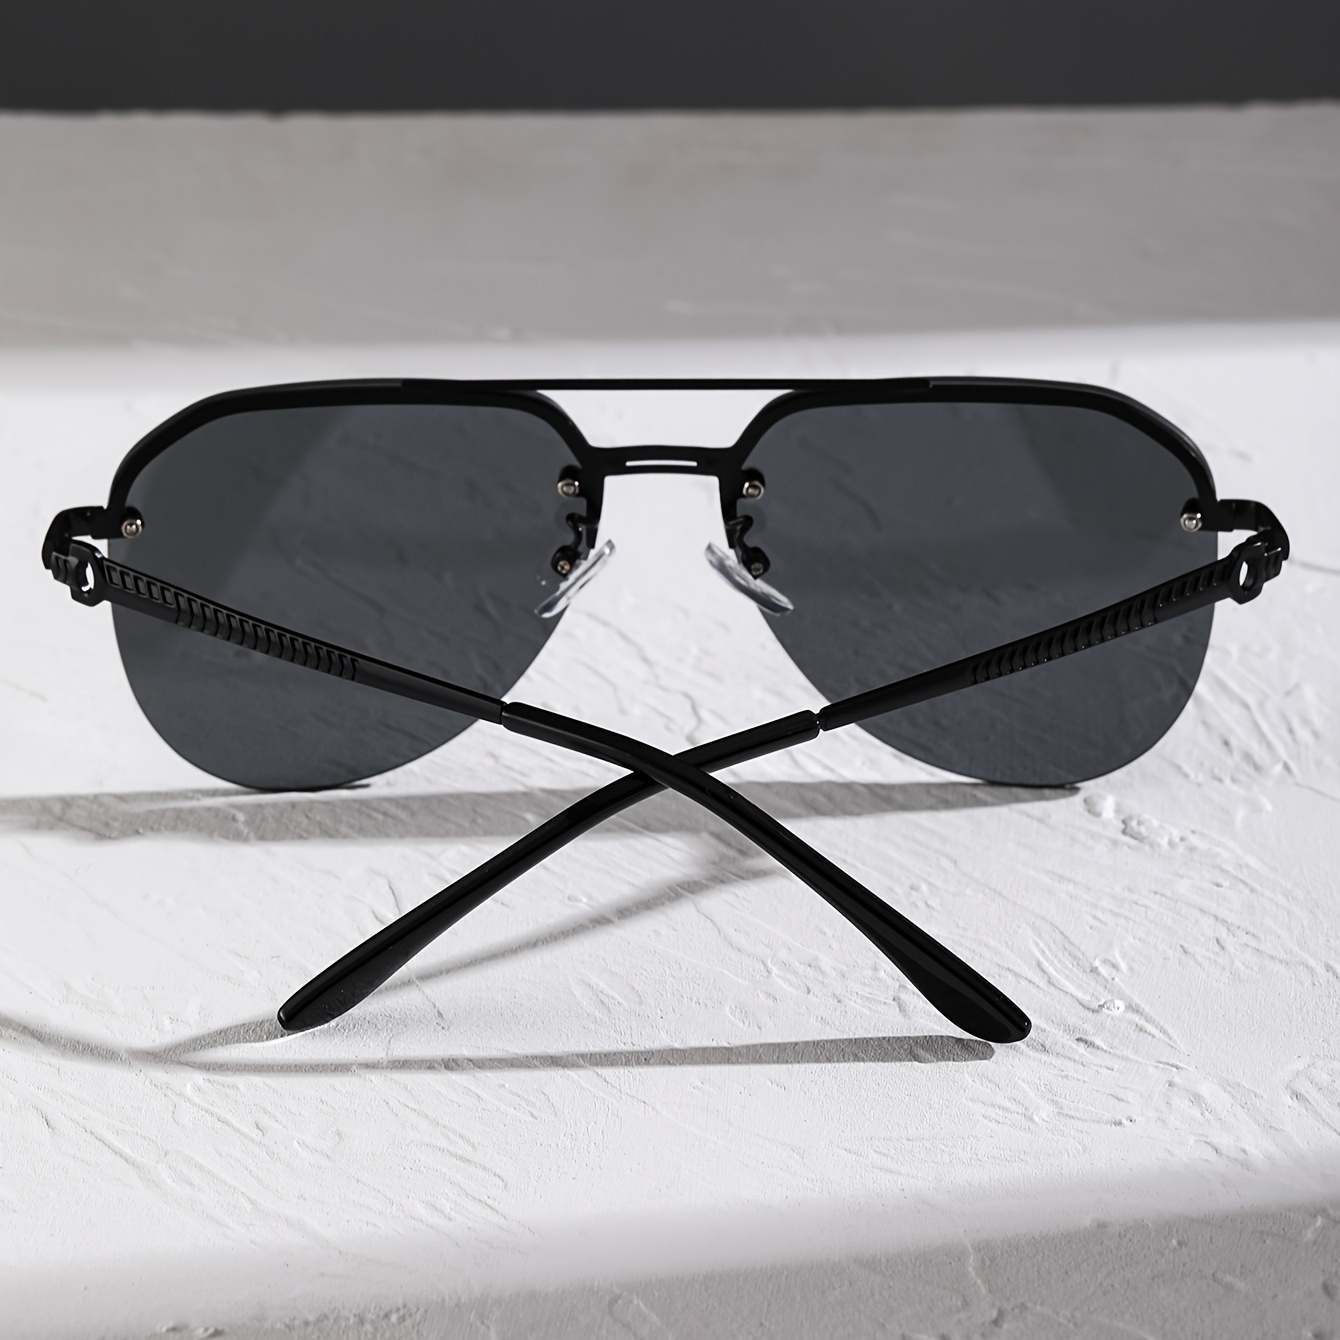 1pair Trendy Large Frame * Fashion Glasses, Casual Metal Fashion Glasses,  Men Women Outdoor Driving Decors